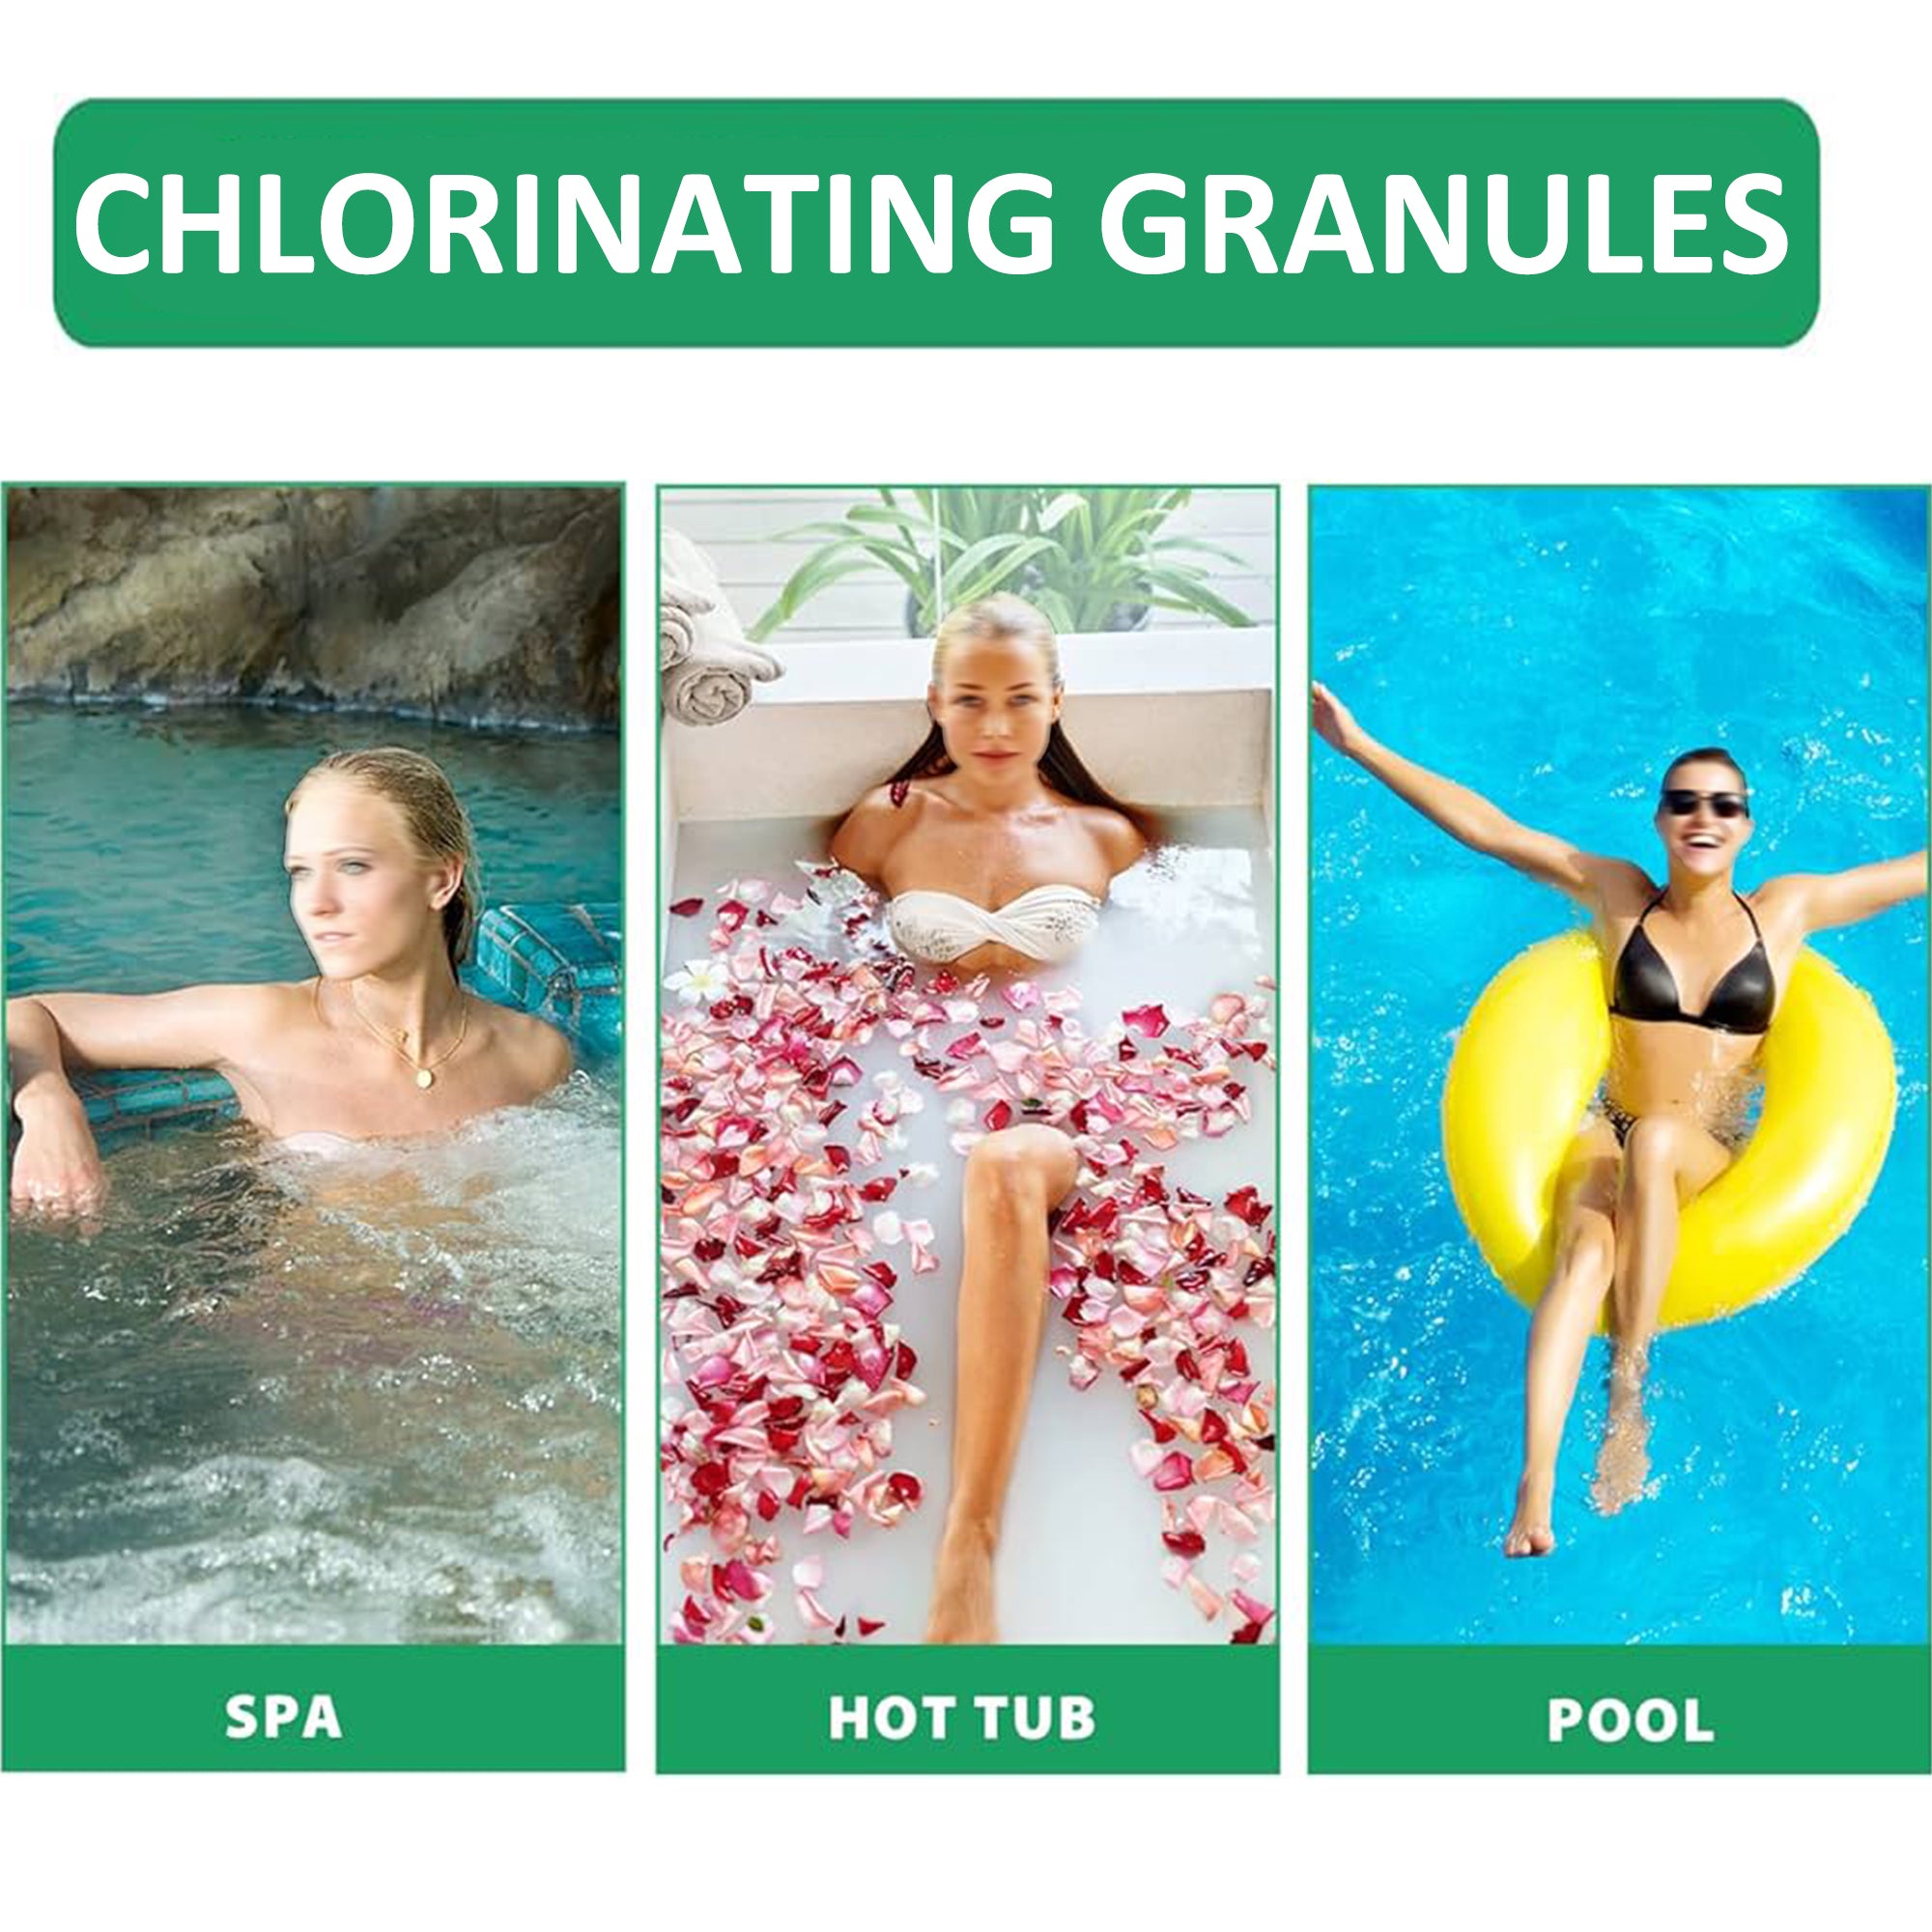 Instructional images on using chlorine granules in a spa or pool setting